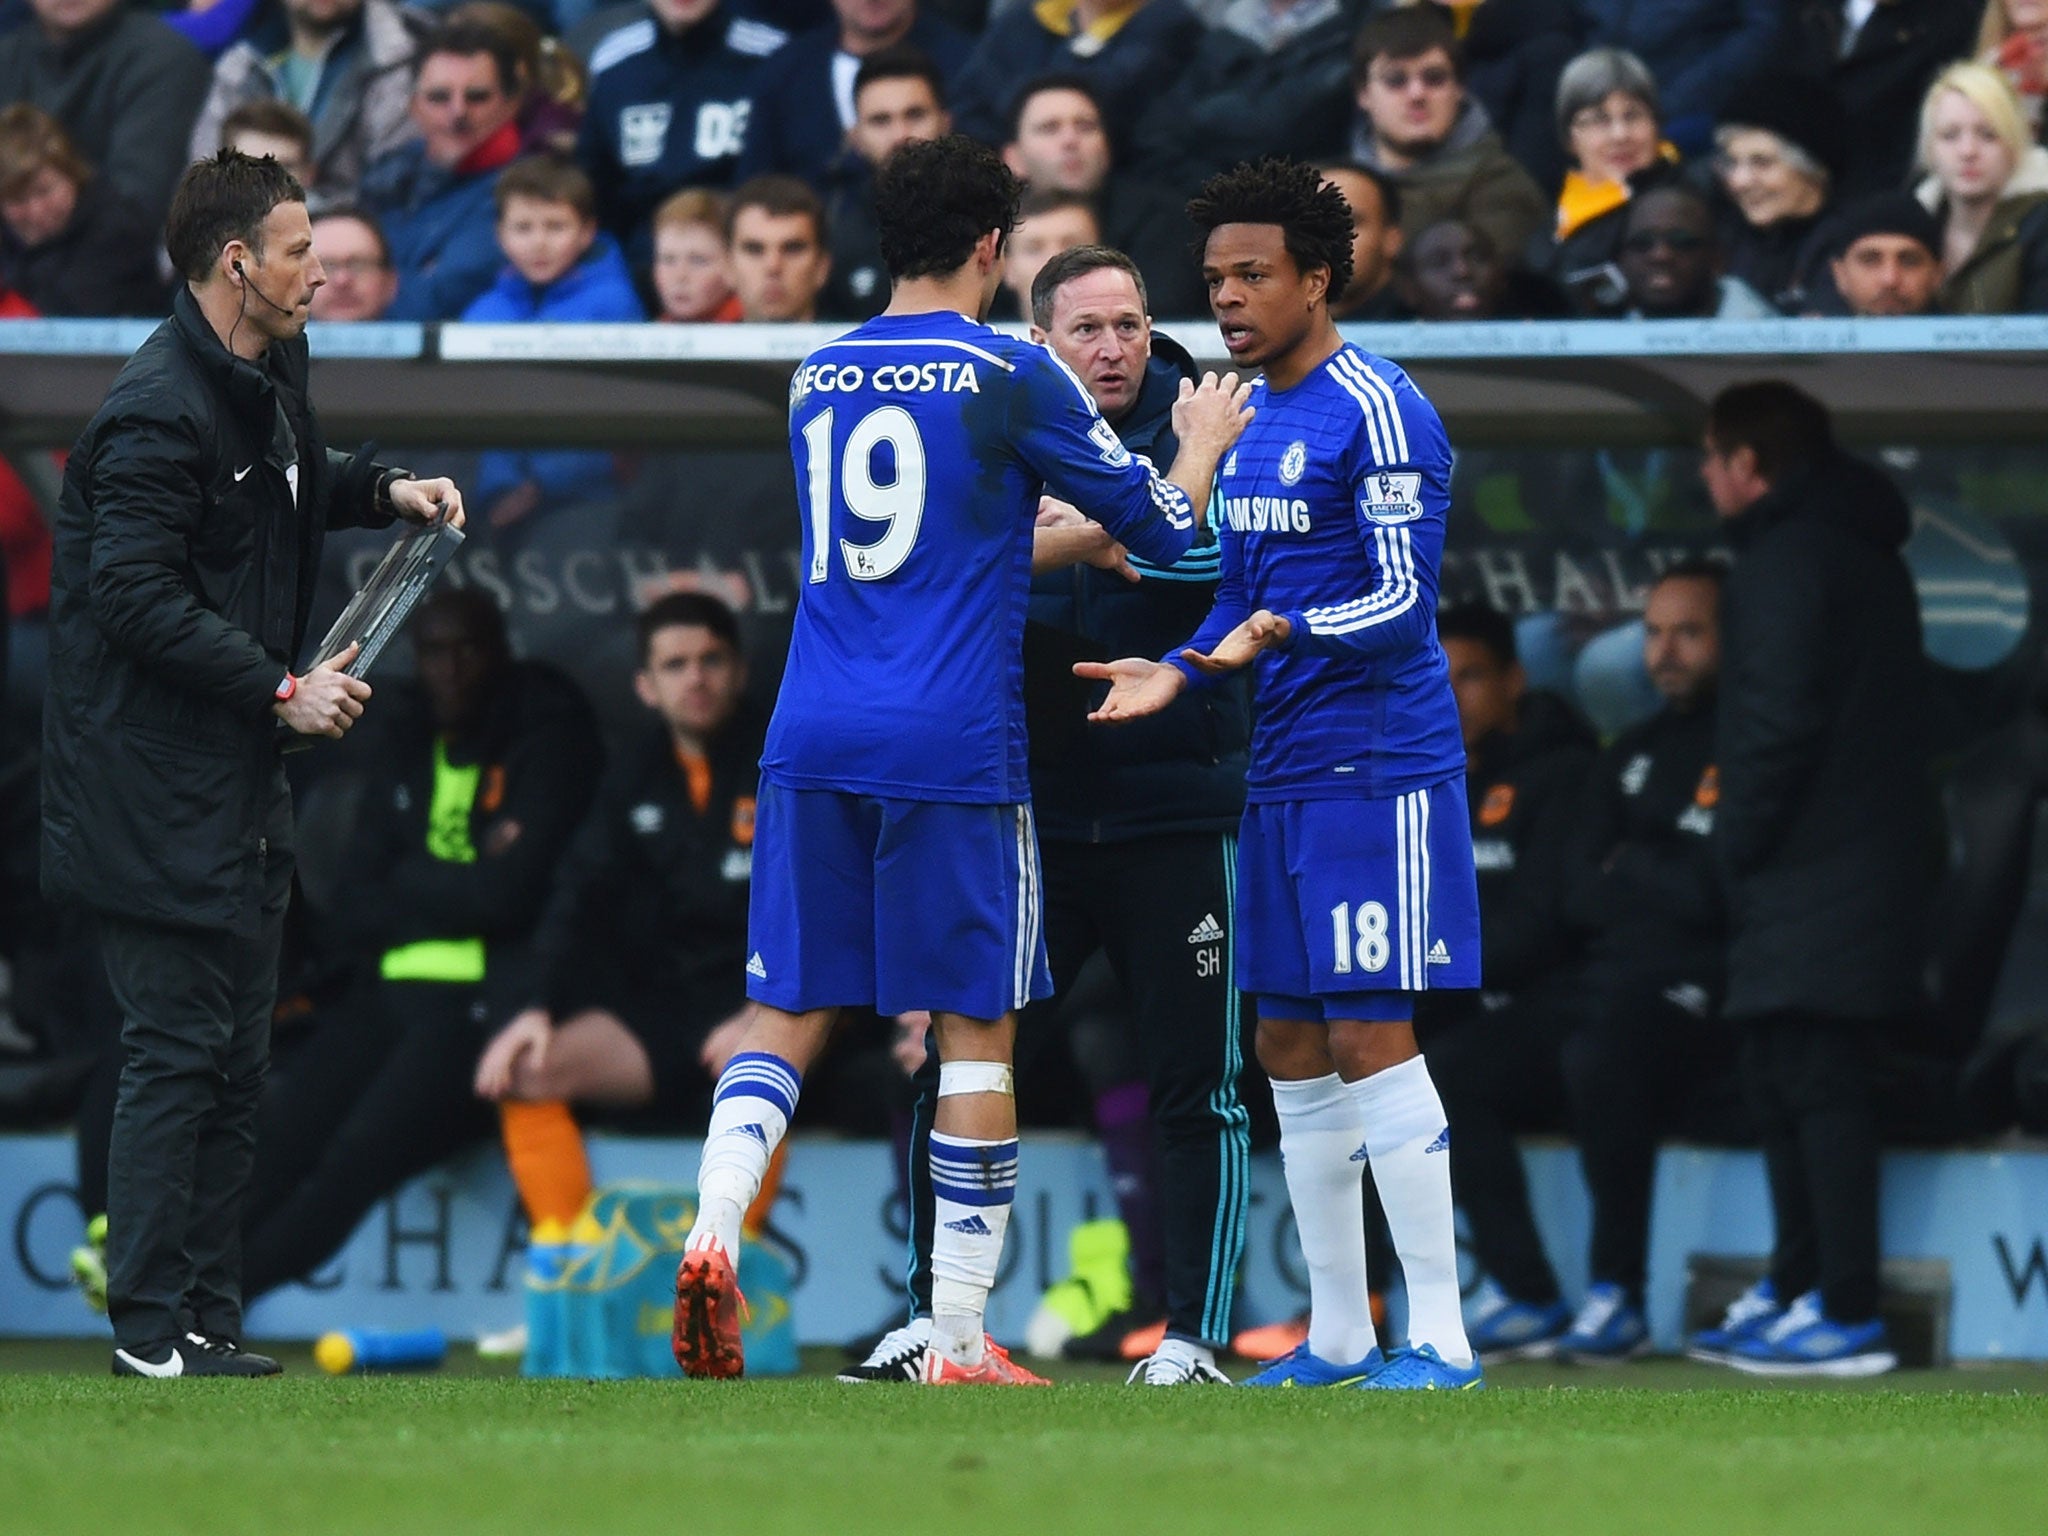 Diego Costa is replaced by Loic Remy